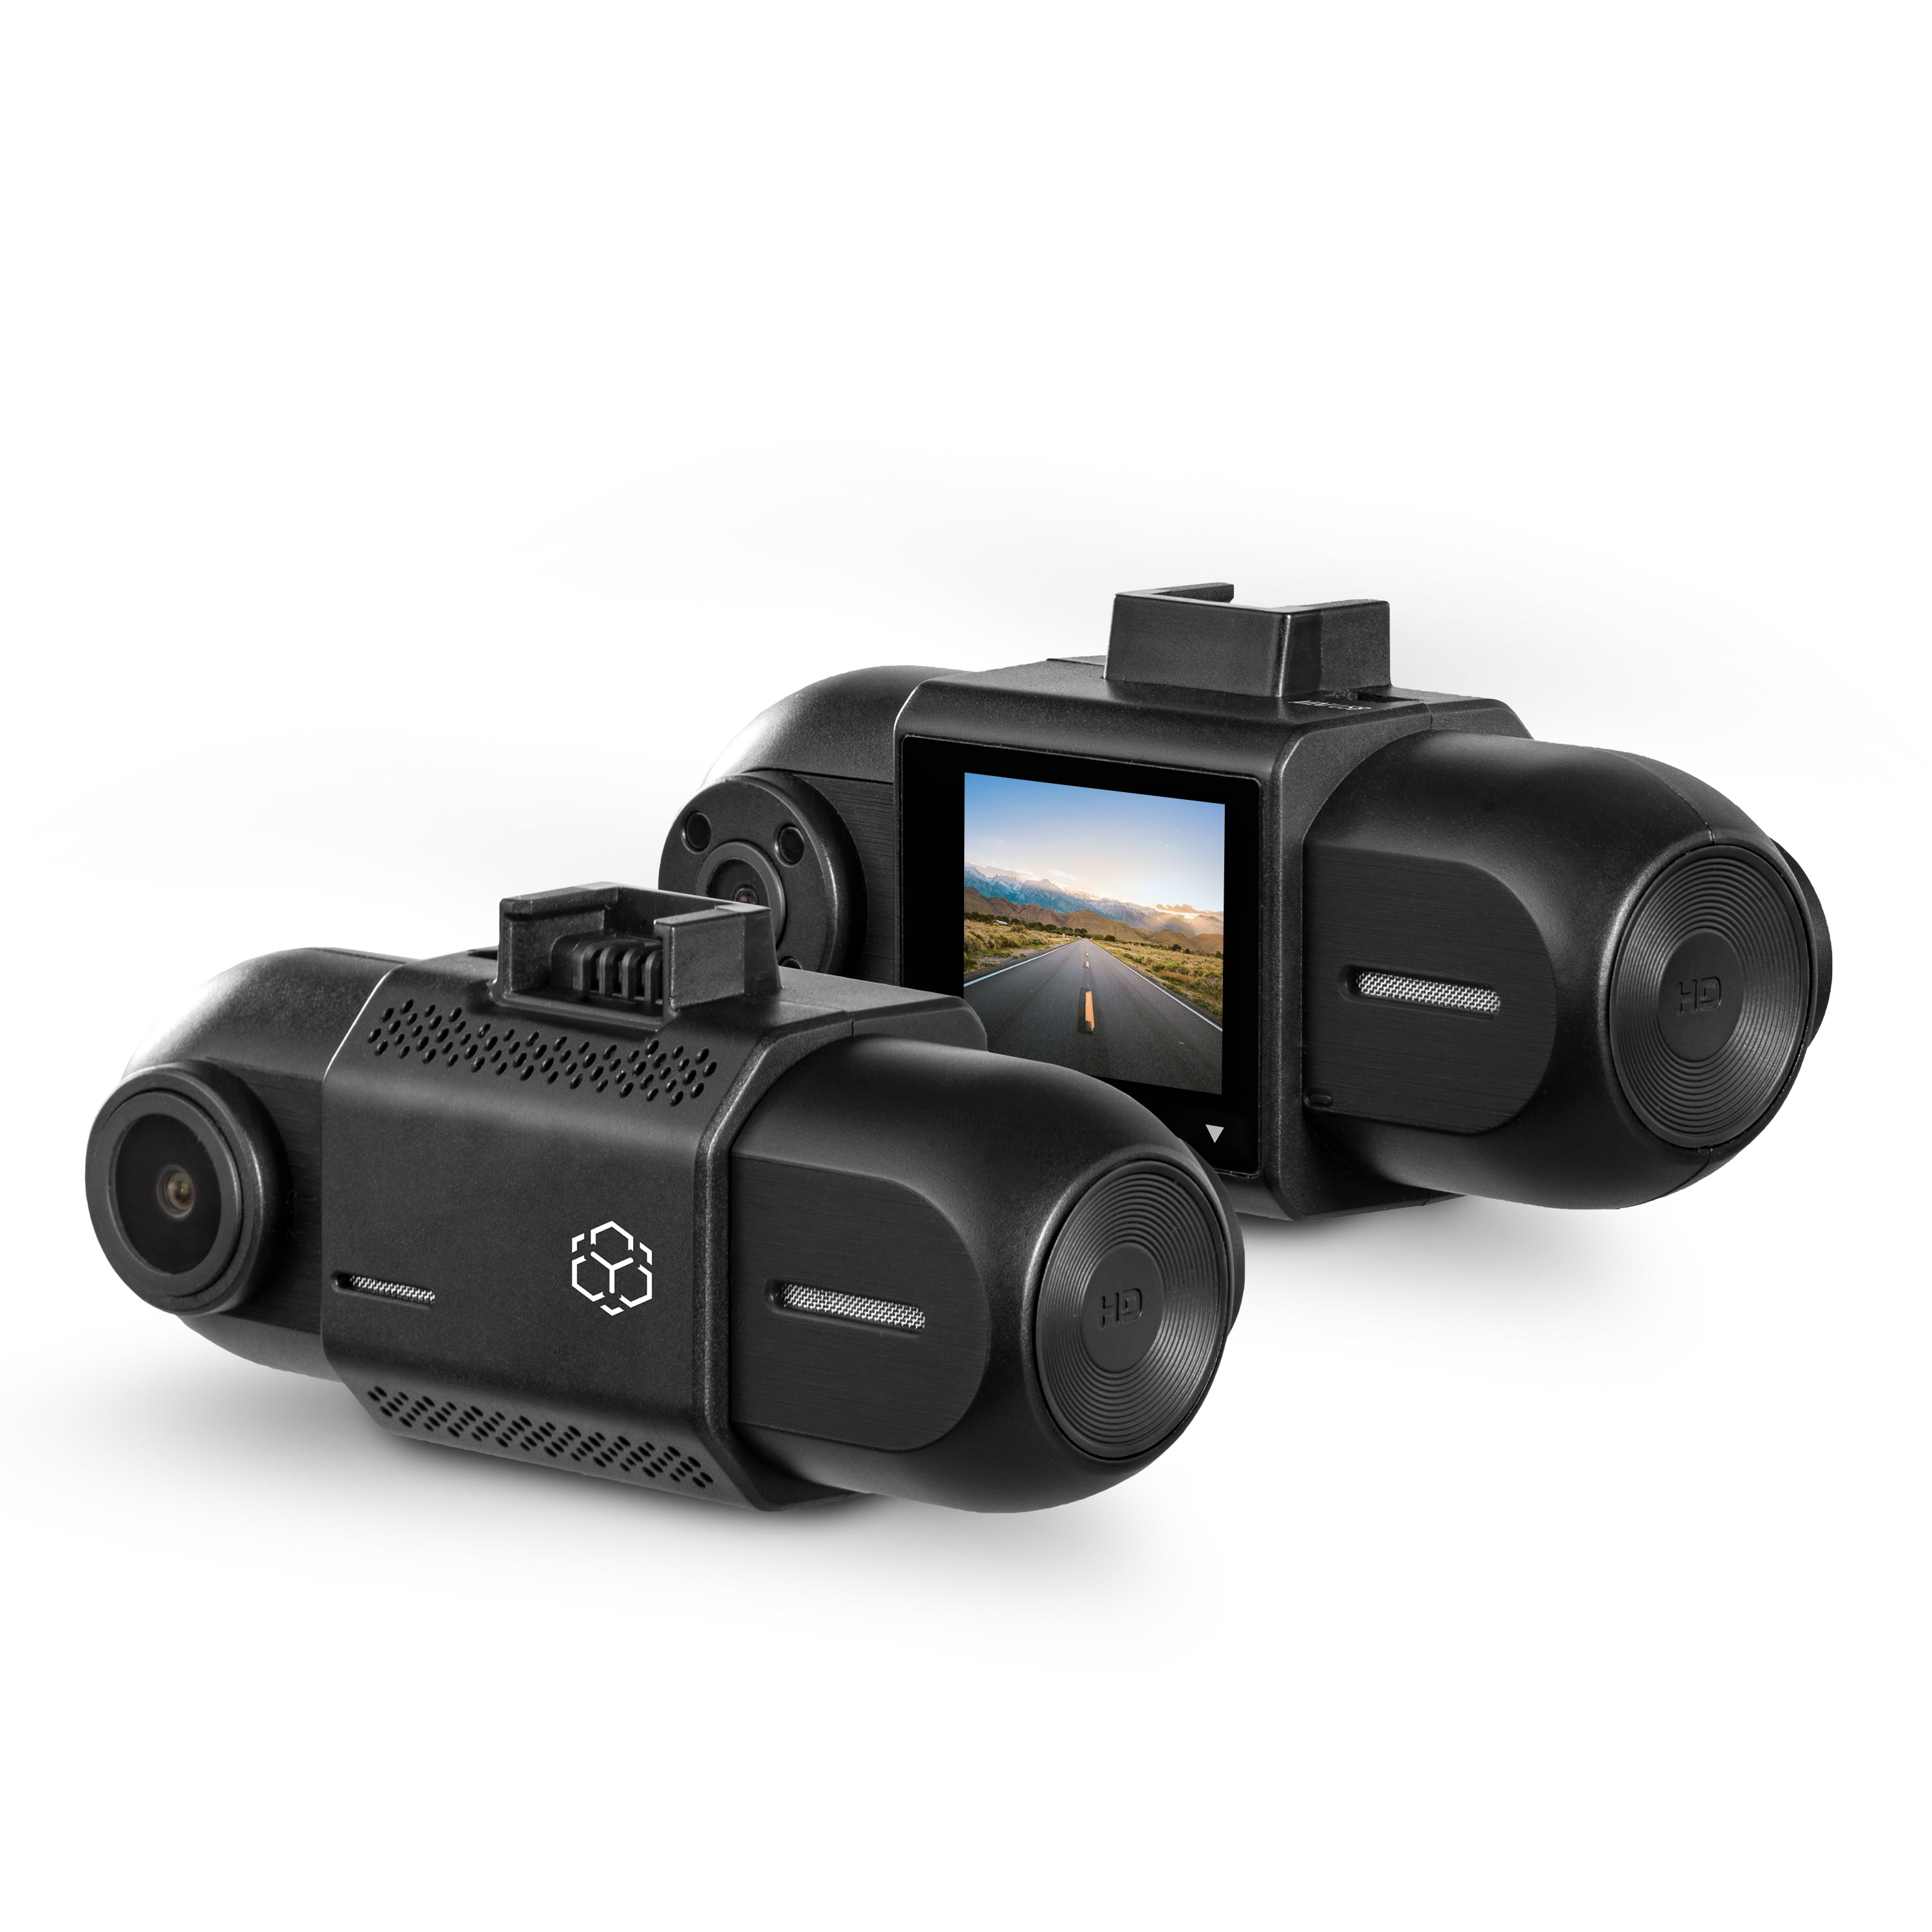 Afspejling Fjern plan YADA Dual 1080P Roadcam with Front and Rear Facing Cameras, 120 Degree Wide  Angle Lens, 1.5" LCD Screen, G-Sensor Technology with Park and Record Mode,  Loop Recording - Walmart.com